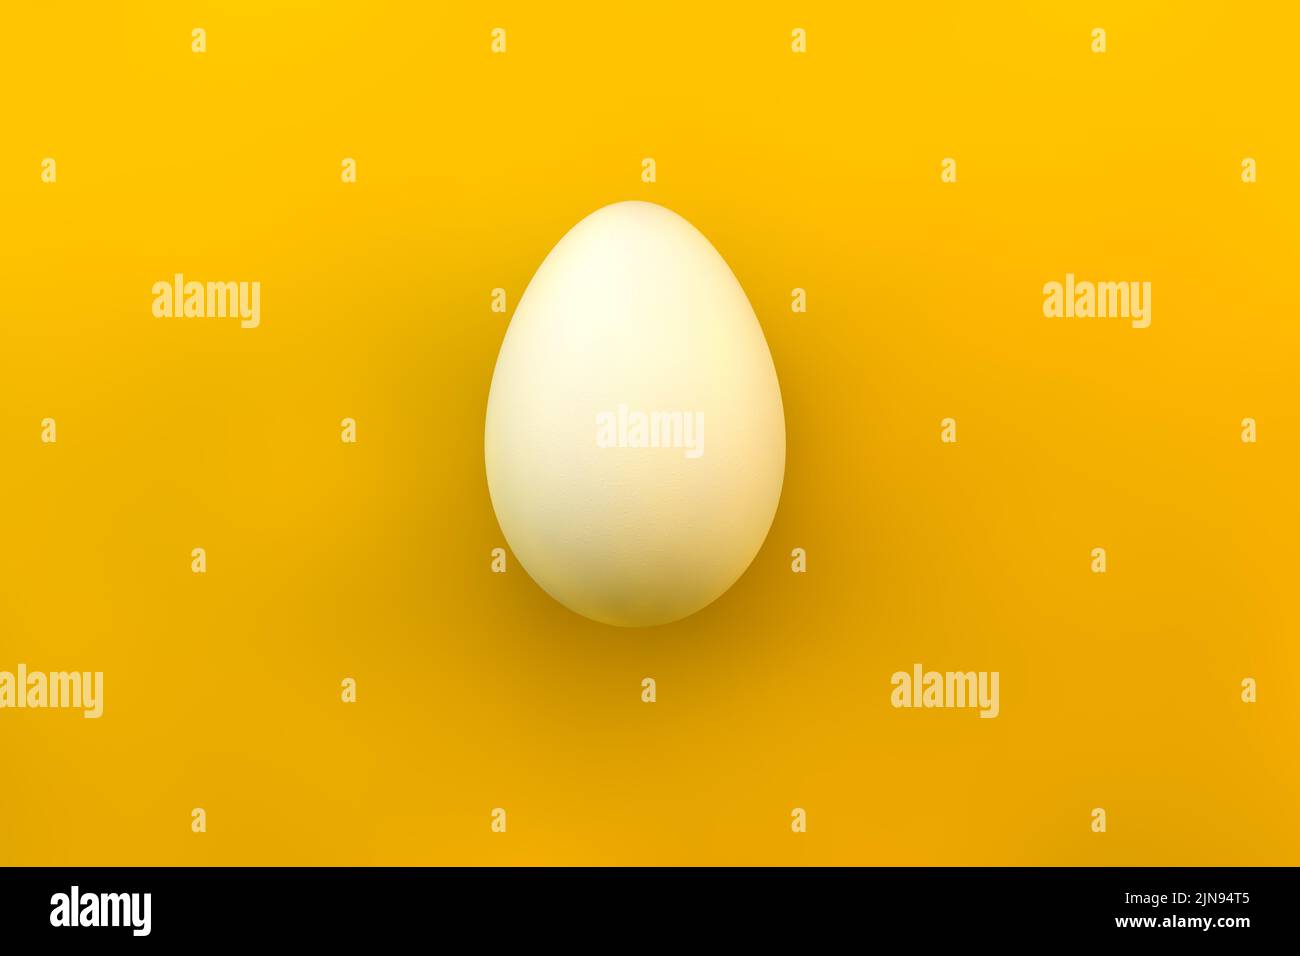 3d render of a chicken egg on a yellow background. View from above. Stock Photo